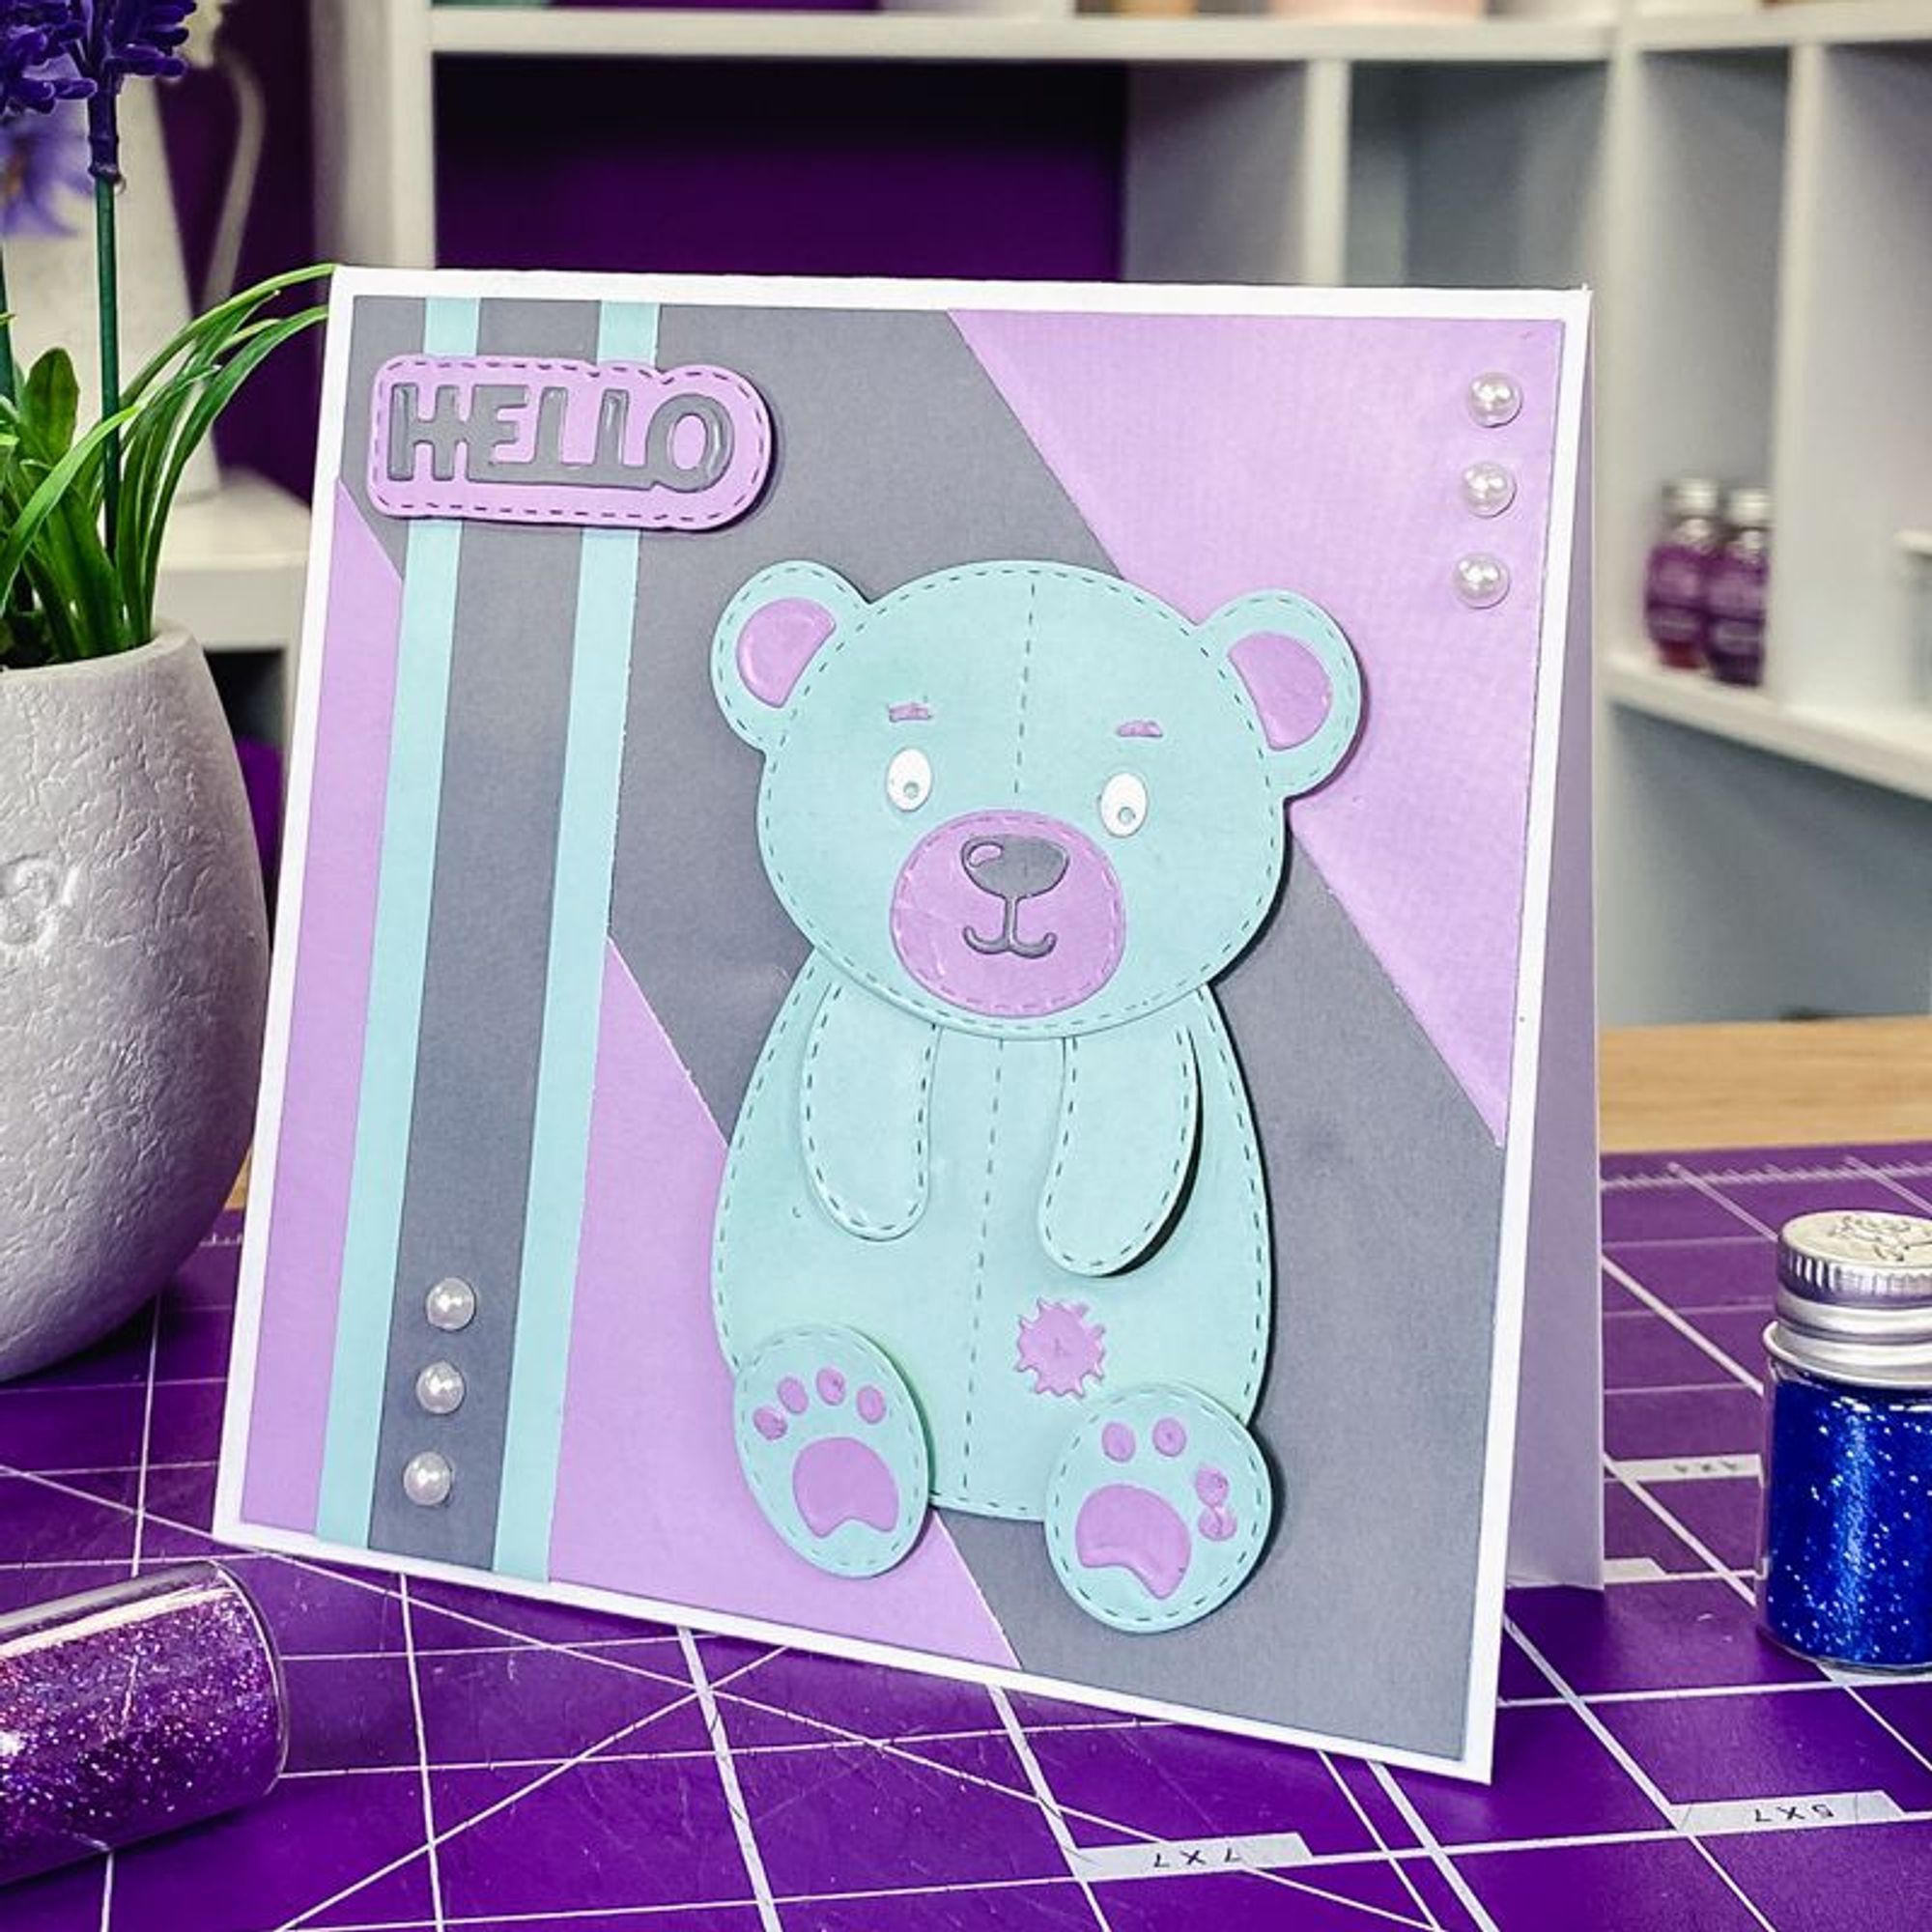 Duo Colour Paper Pad - Pinks & Purples